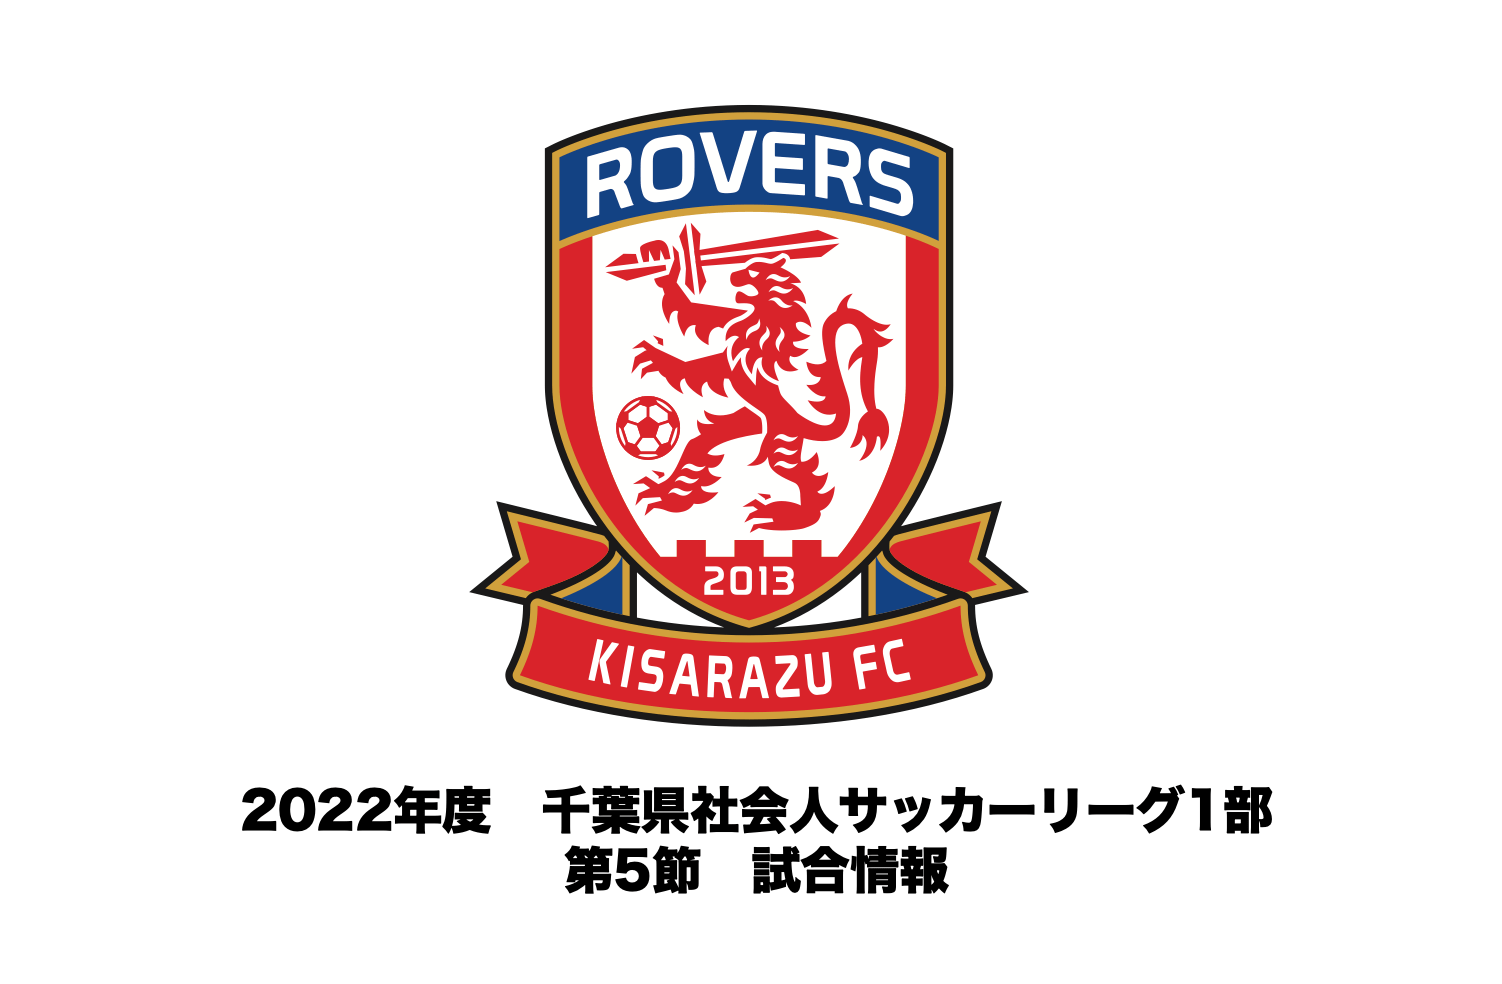 You are currently viewing 【試合情報】2022年度 千葉県社会人サッカーリーグ1部 第5節について